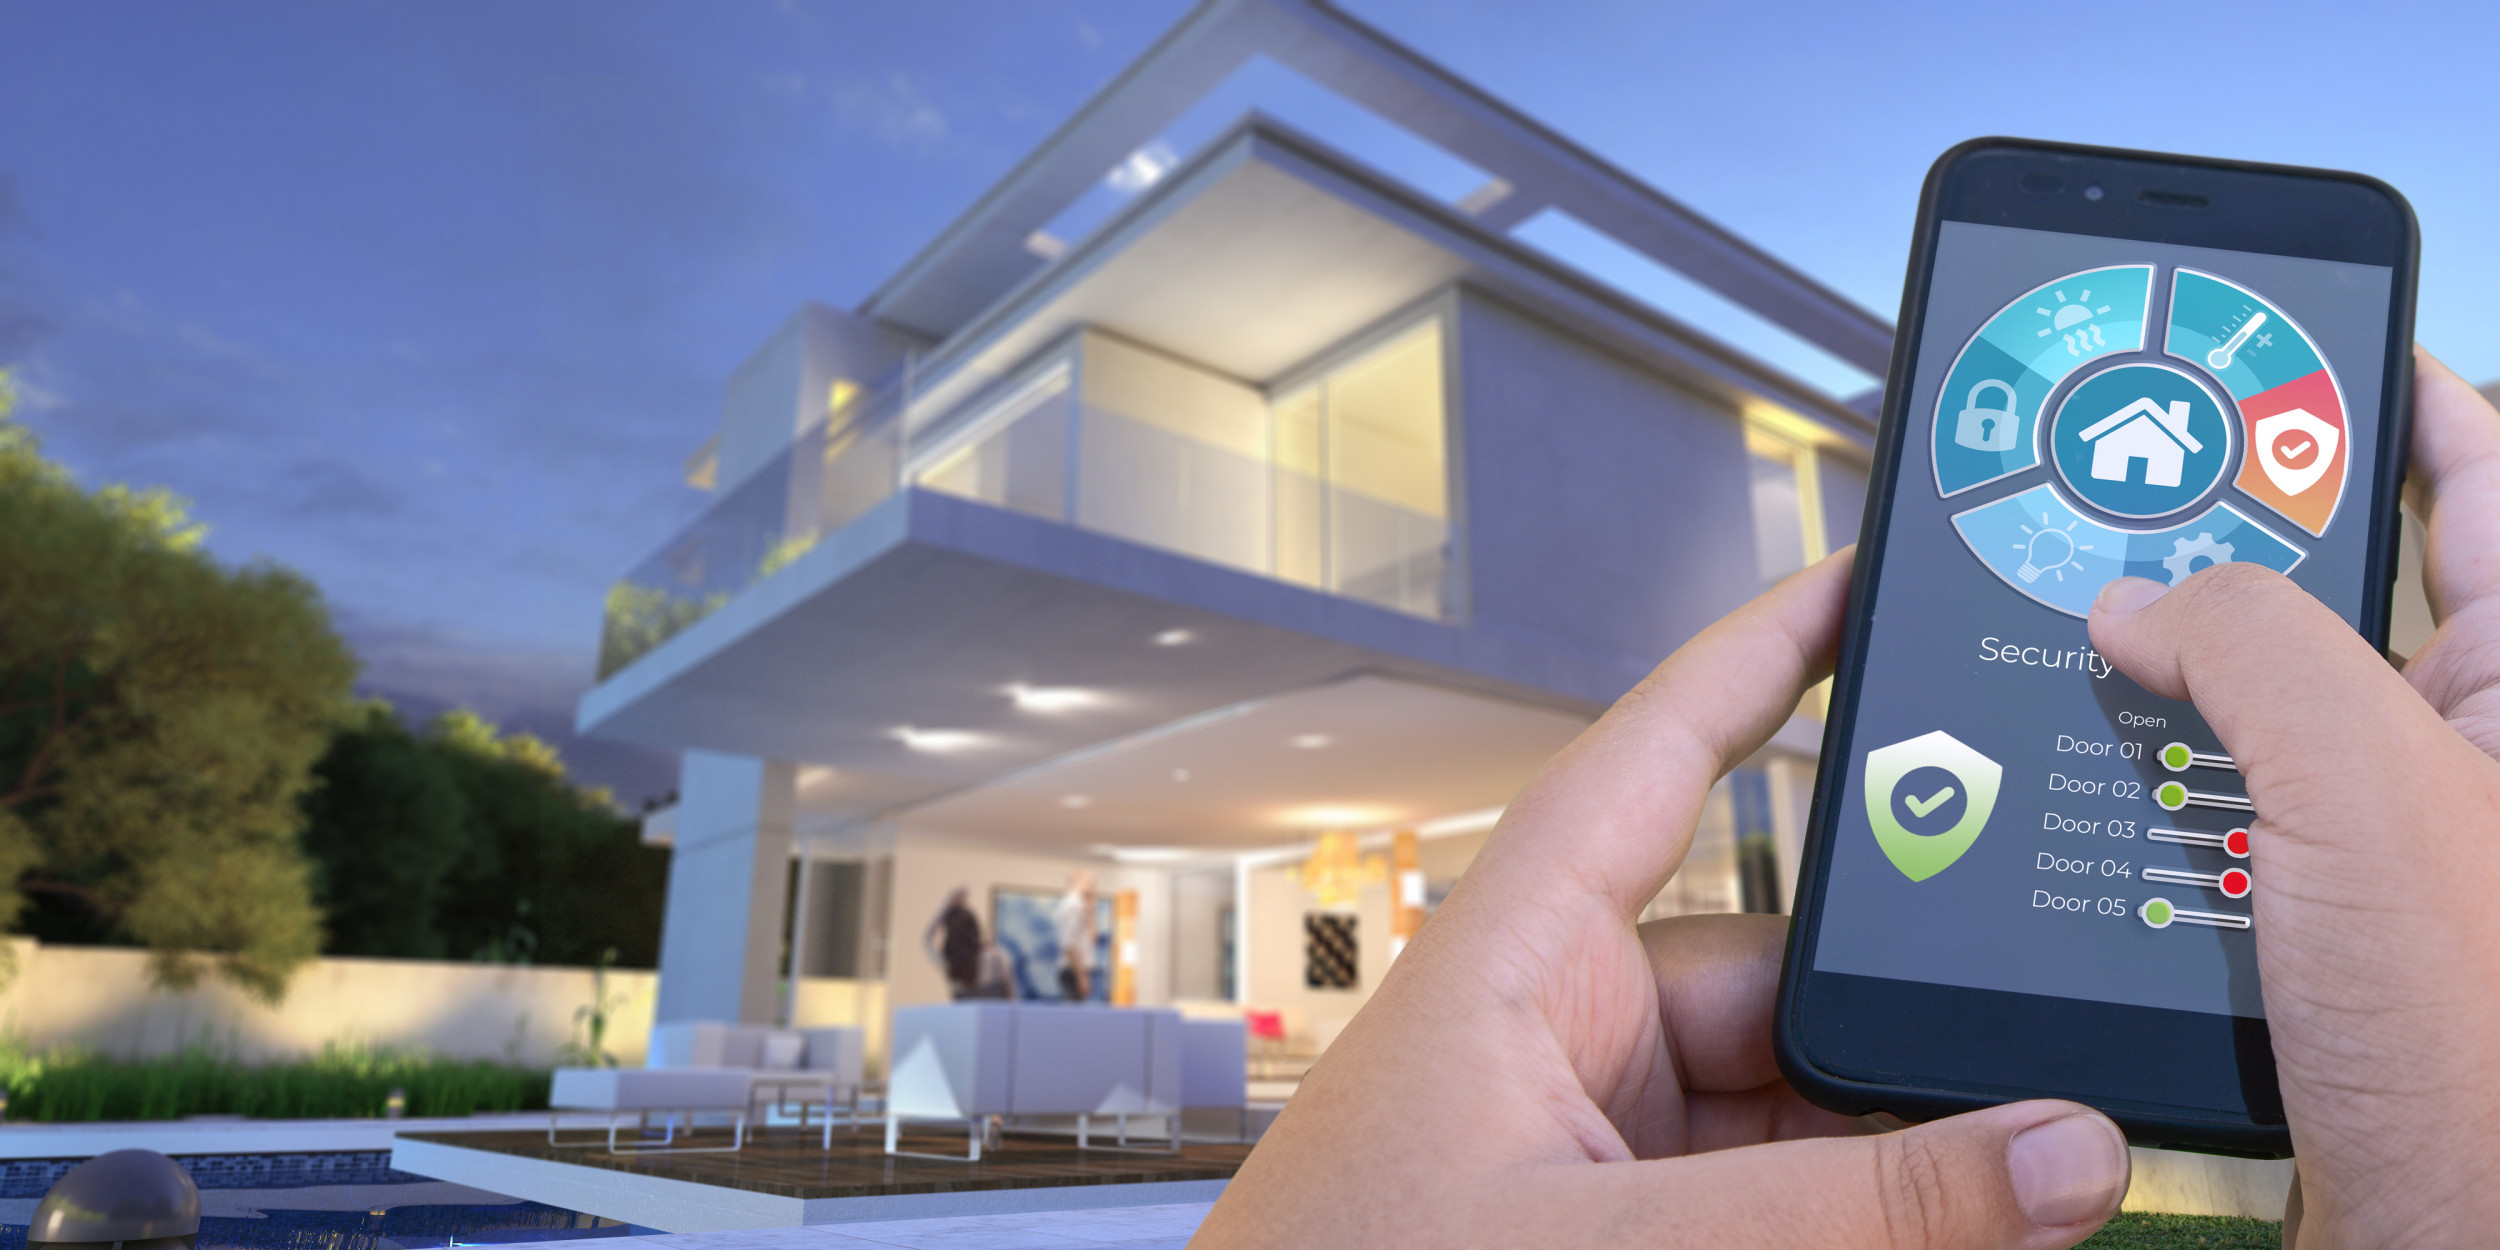 Looking to the future, Visionary Homes makes life more convenient with smart home technology